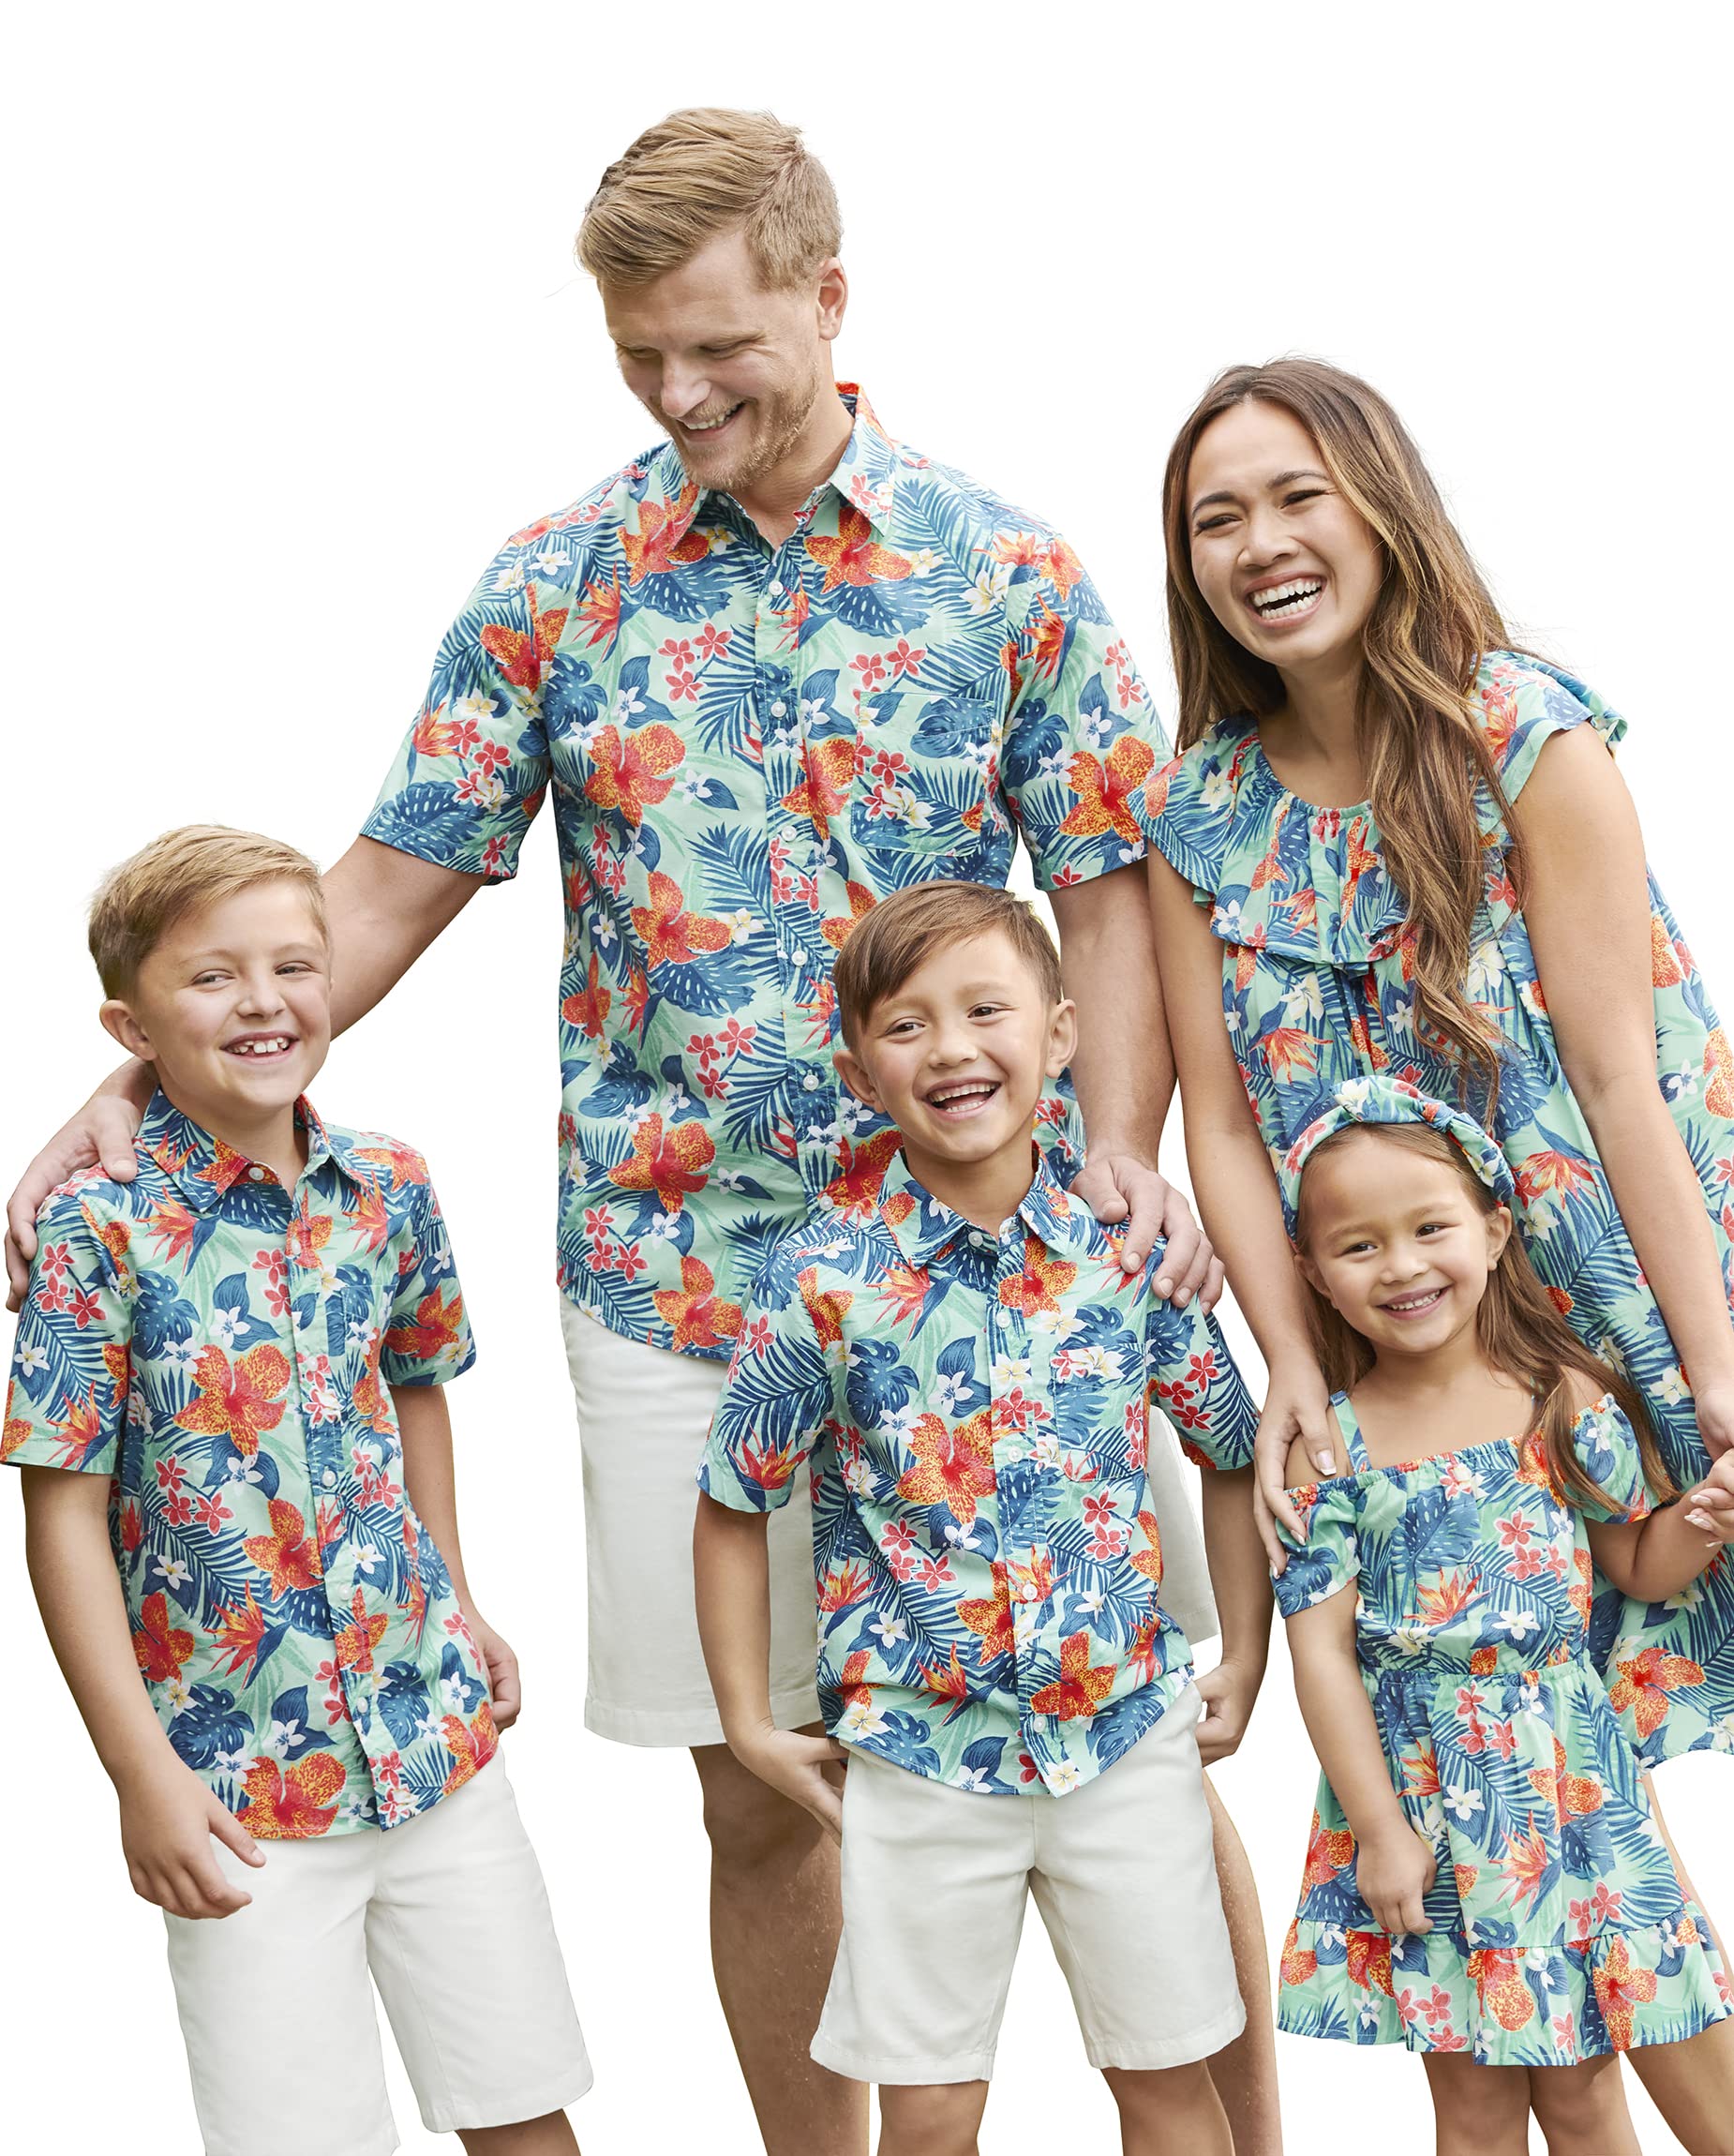 The Children's Place Kids' Family Matching Outfits, Mommy & Me, Dad & Son, Baby, Vacation Collection